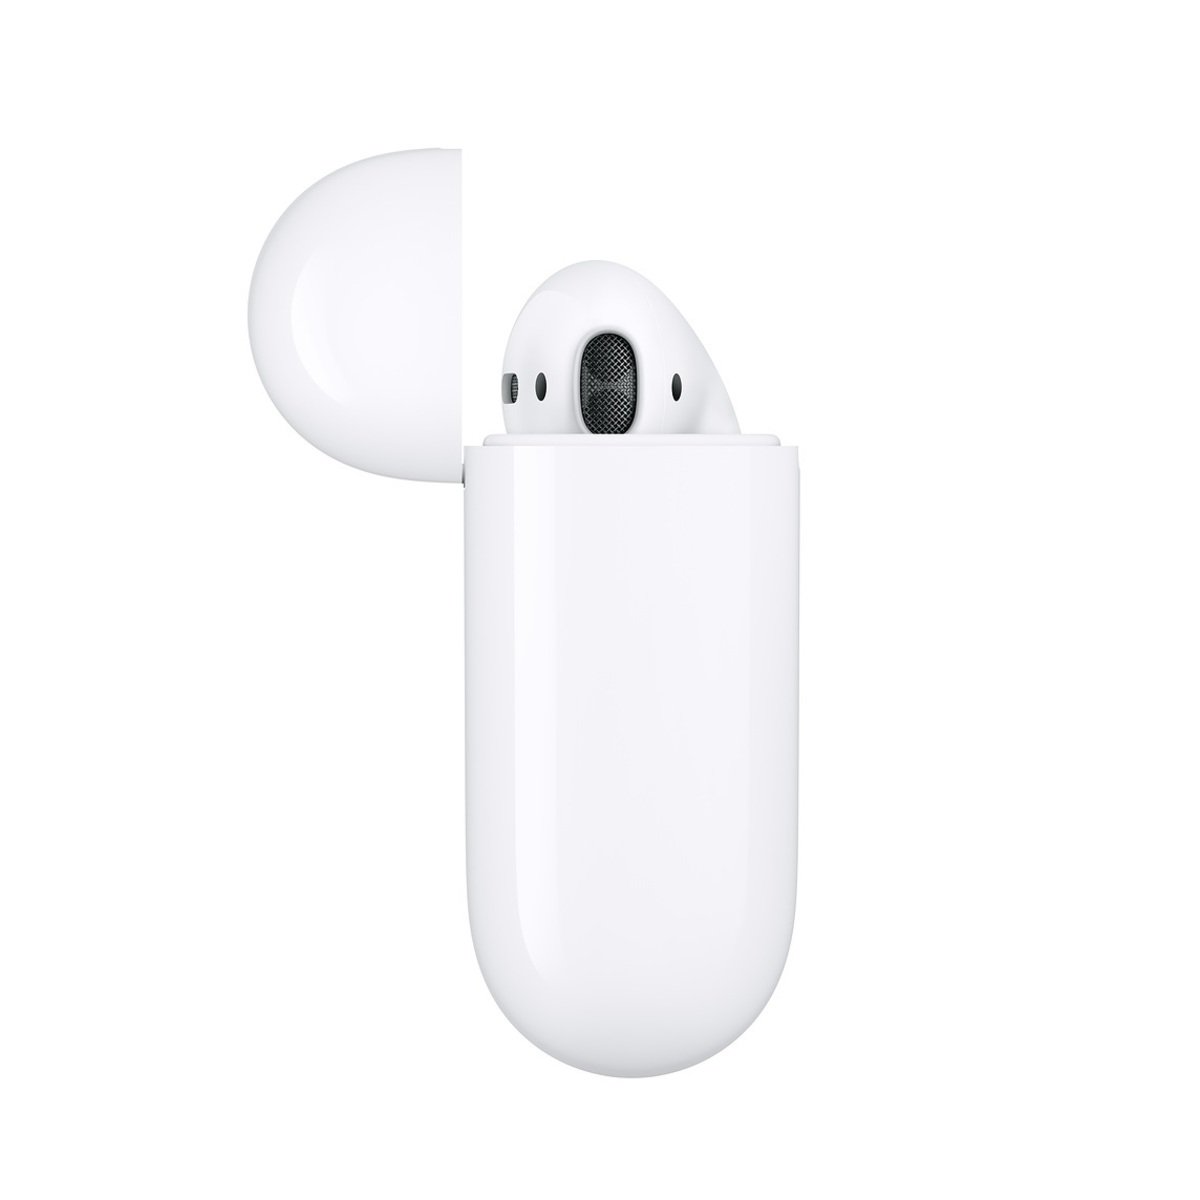 Apple AirPods 2019 with Wireless Charging Case MRXJ2Z